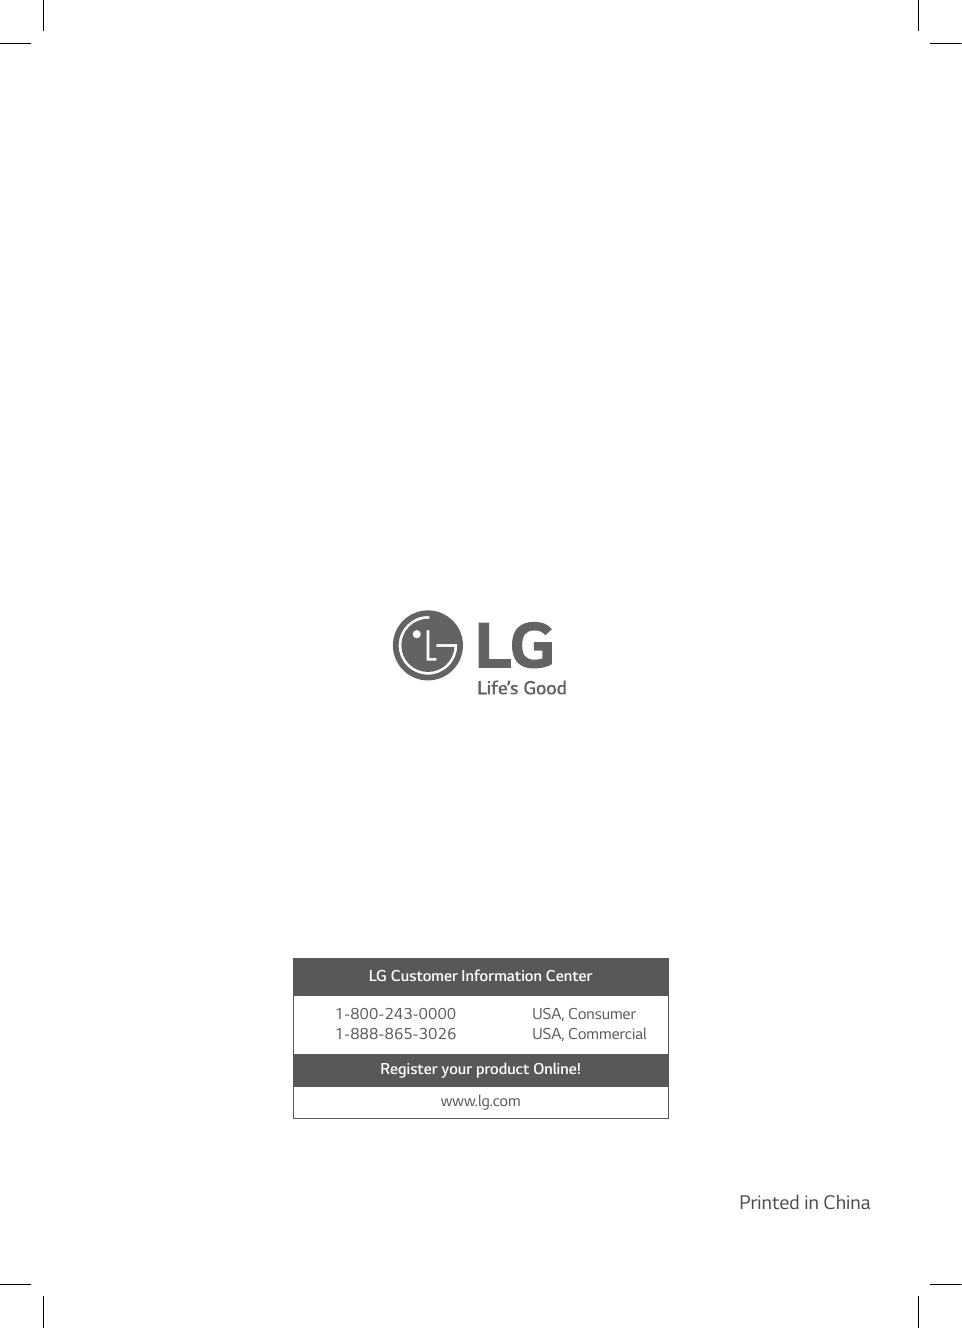 LG Customer Information Center1-800-243-0000  USA, Consumer1-888-865-3026  USA, CommercialRegister your product Online!www.lg.comPrinted in China